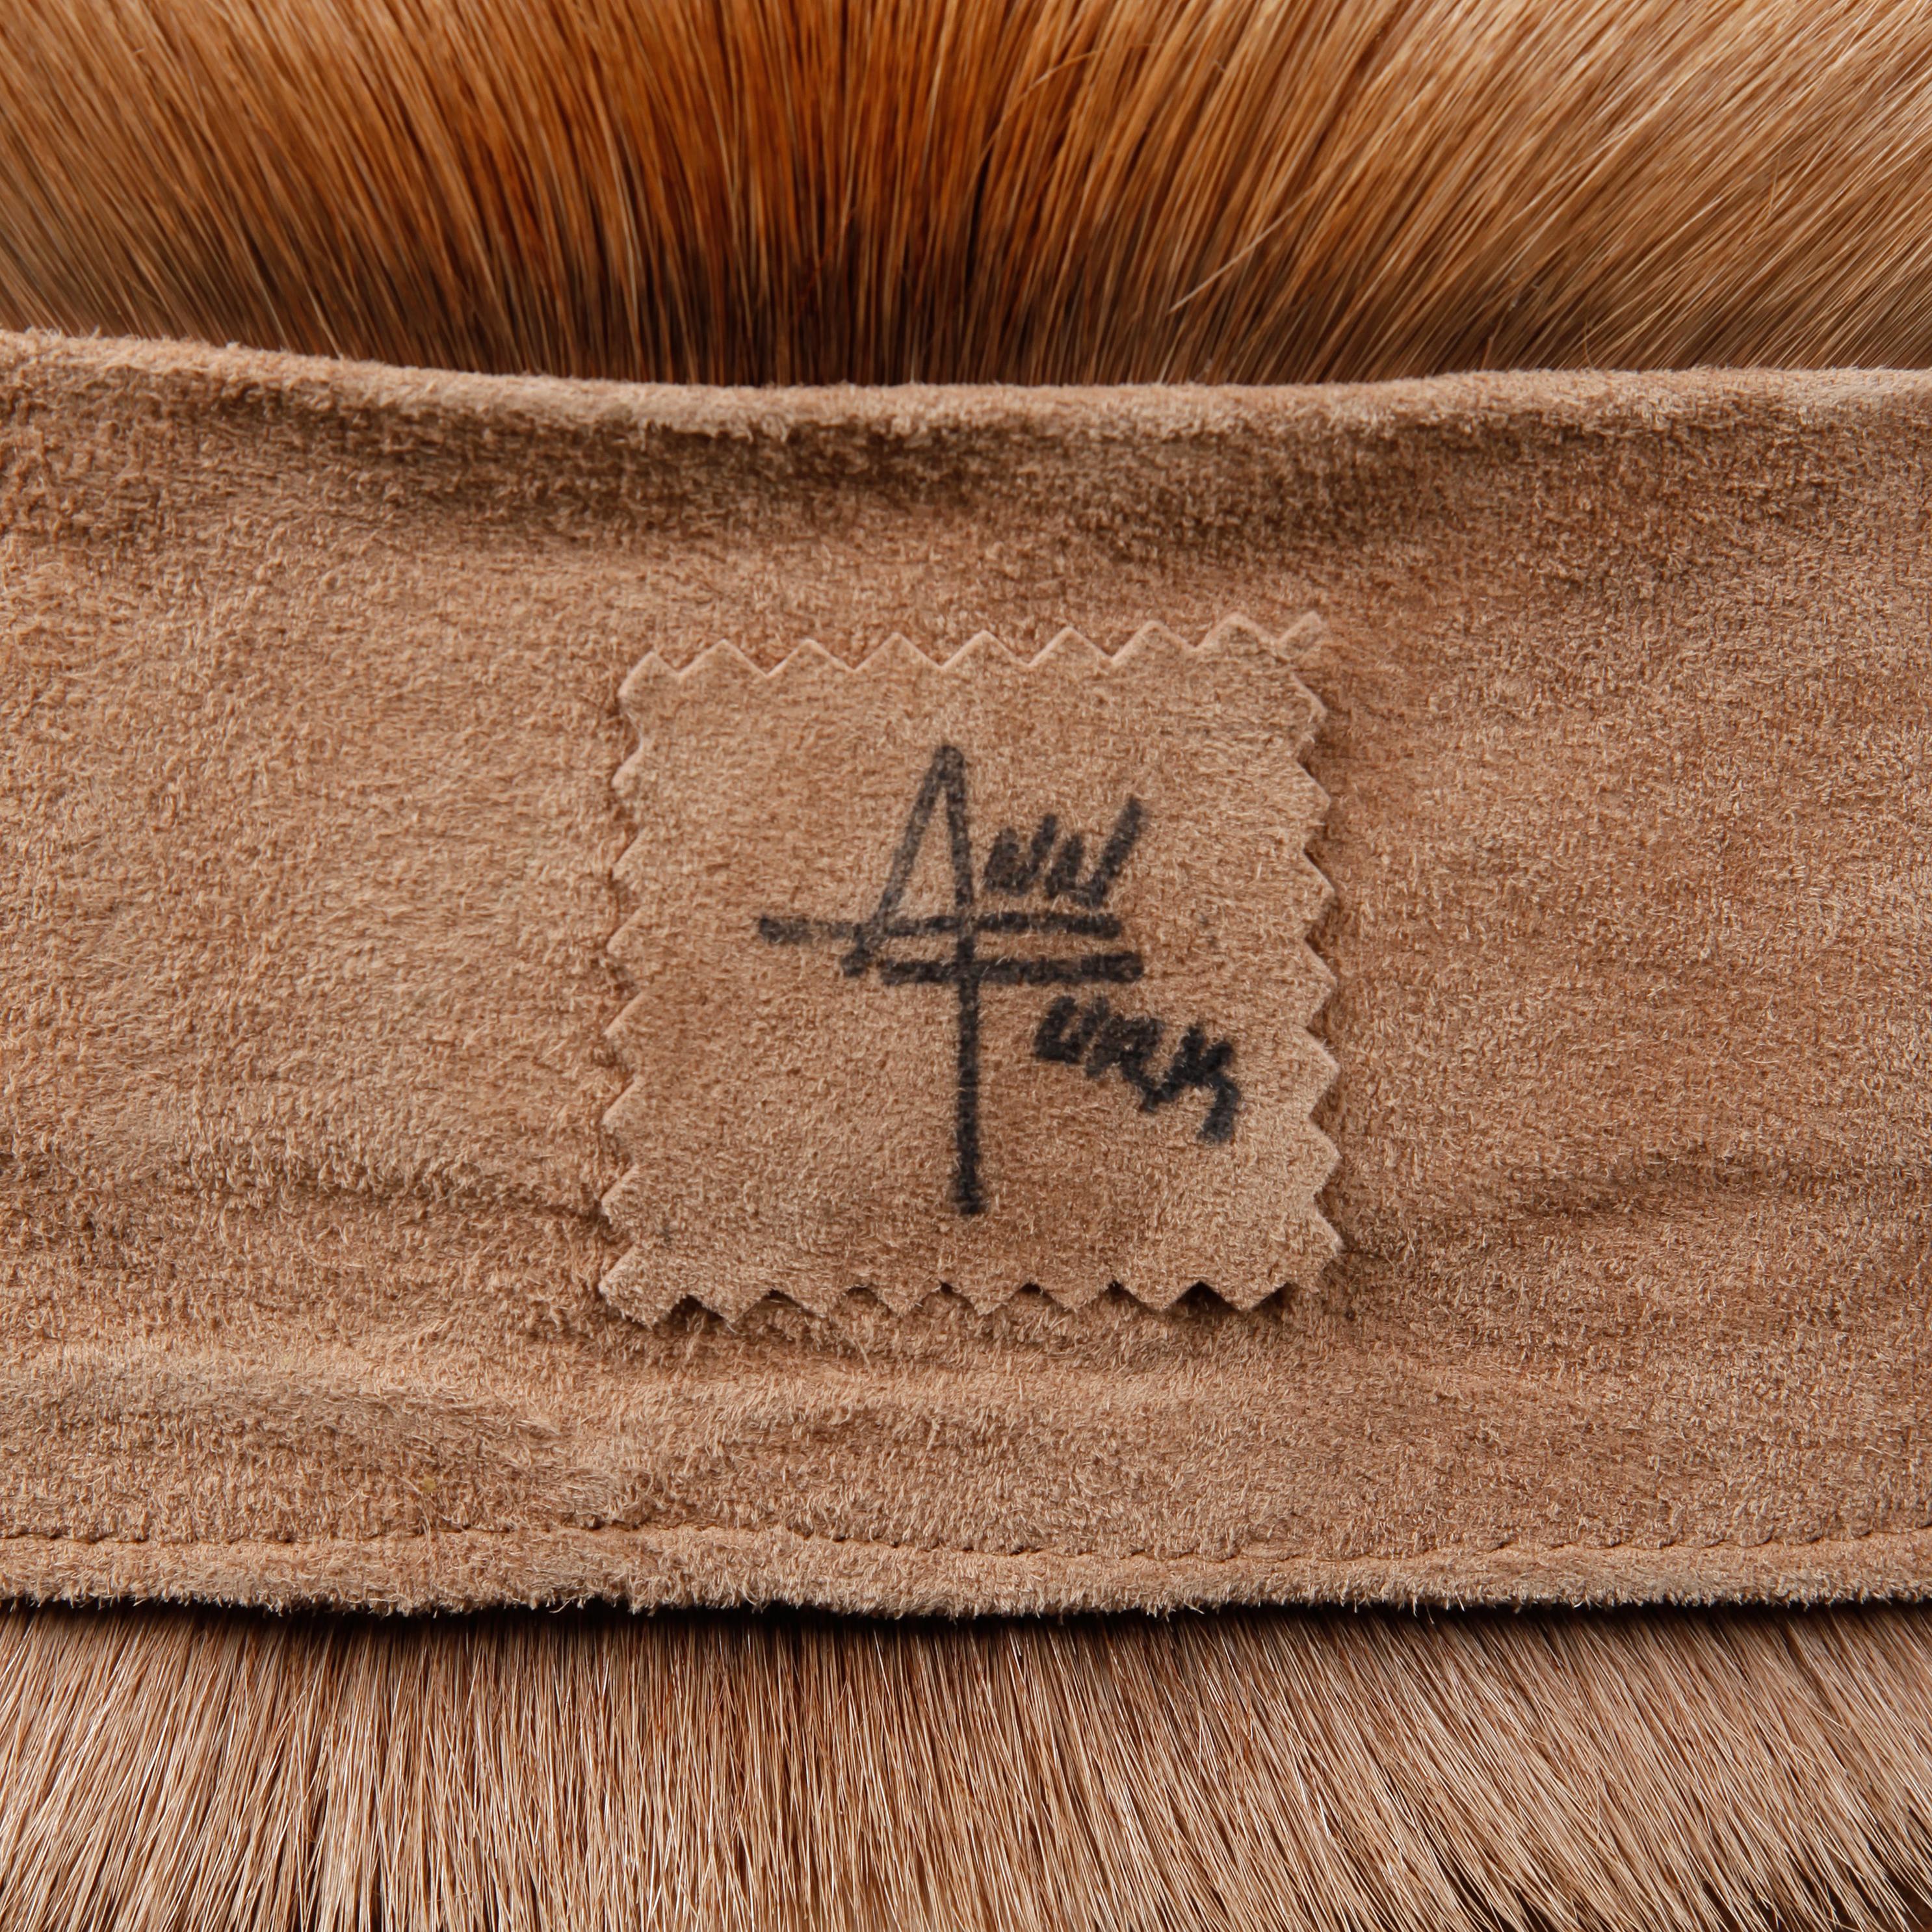 Rare Ann Turk vintage genuine fur and suede leather belt or sash with an Ann Turk signature on the back of the belt. Unlined with rear tie closure. The width at the center of the belt is 6